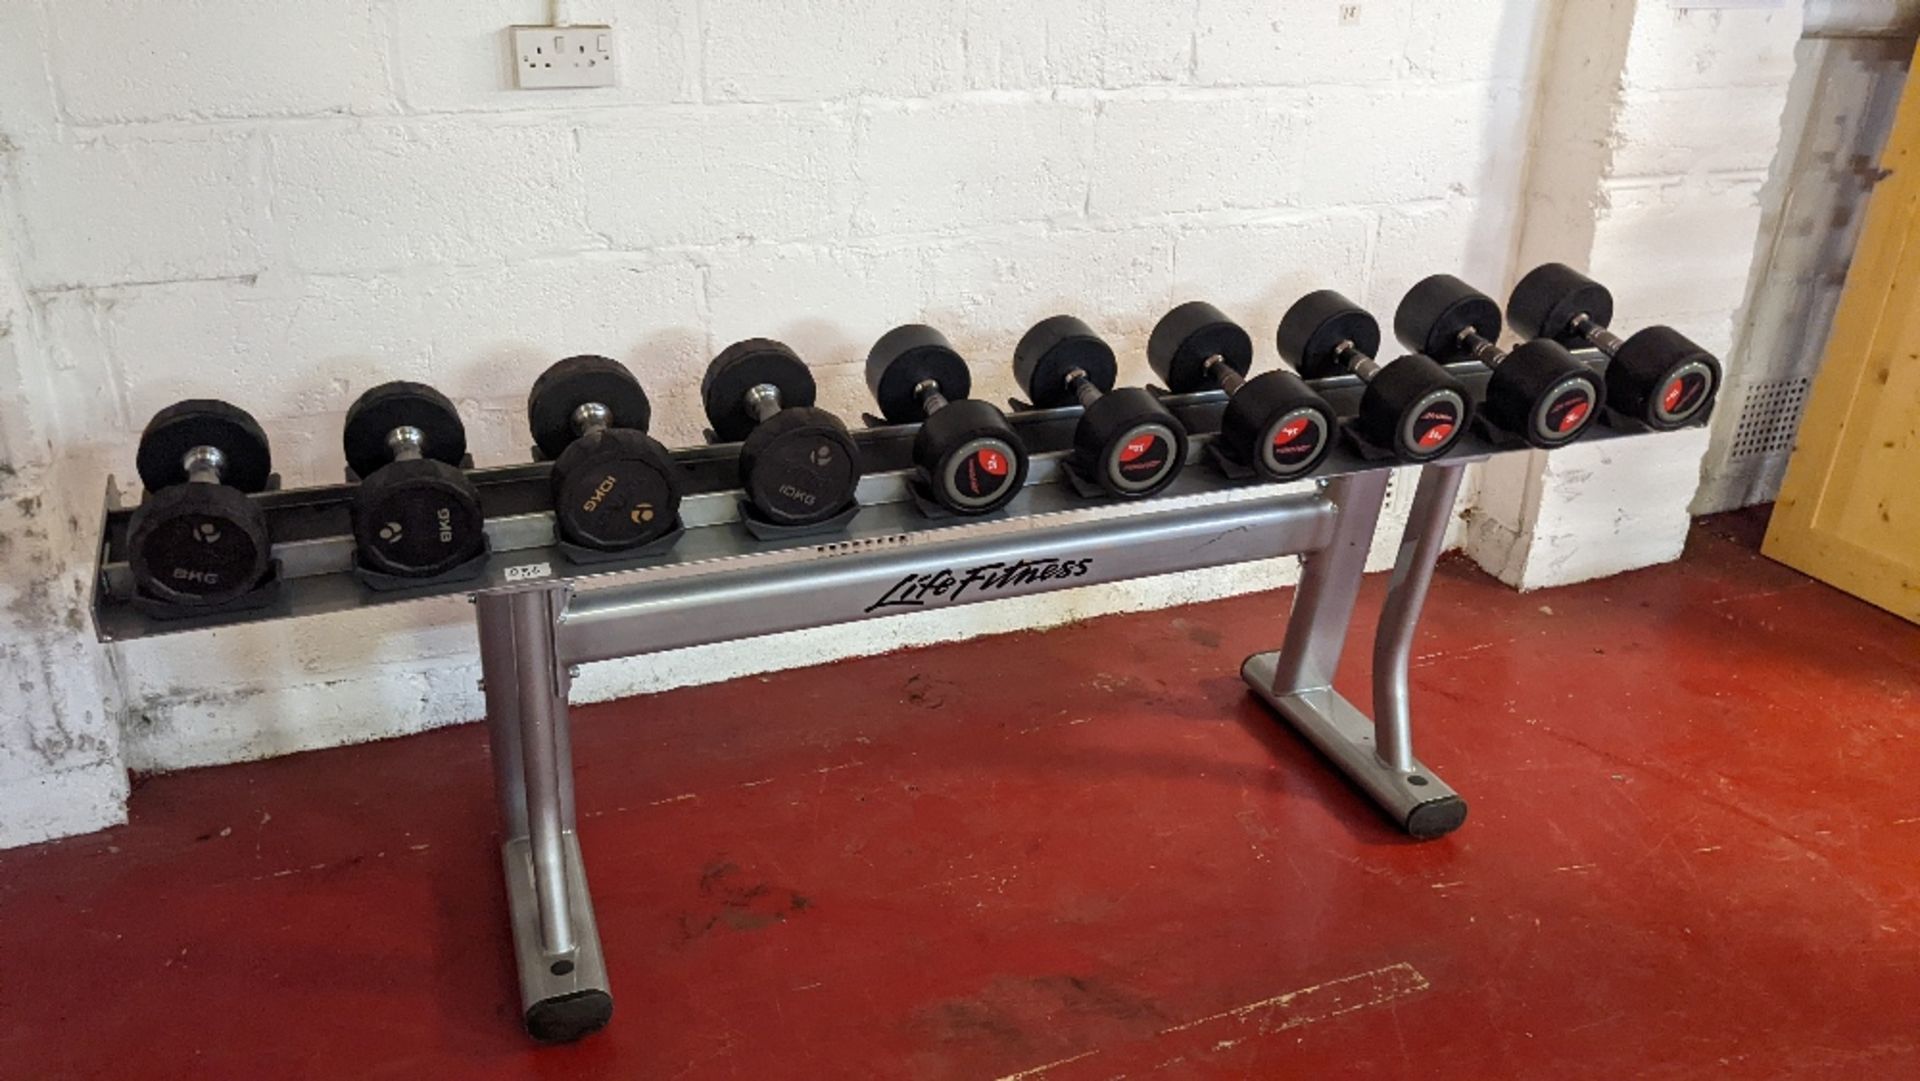 (3 Pairs) Life Fitness Dumbbells and (2 pairs) TuffTech Dumbbells with Life Fitness Rack - Image 2 of 6